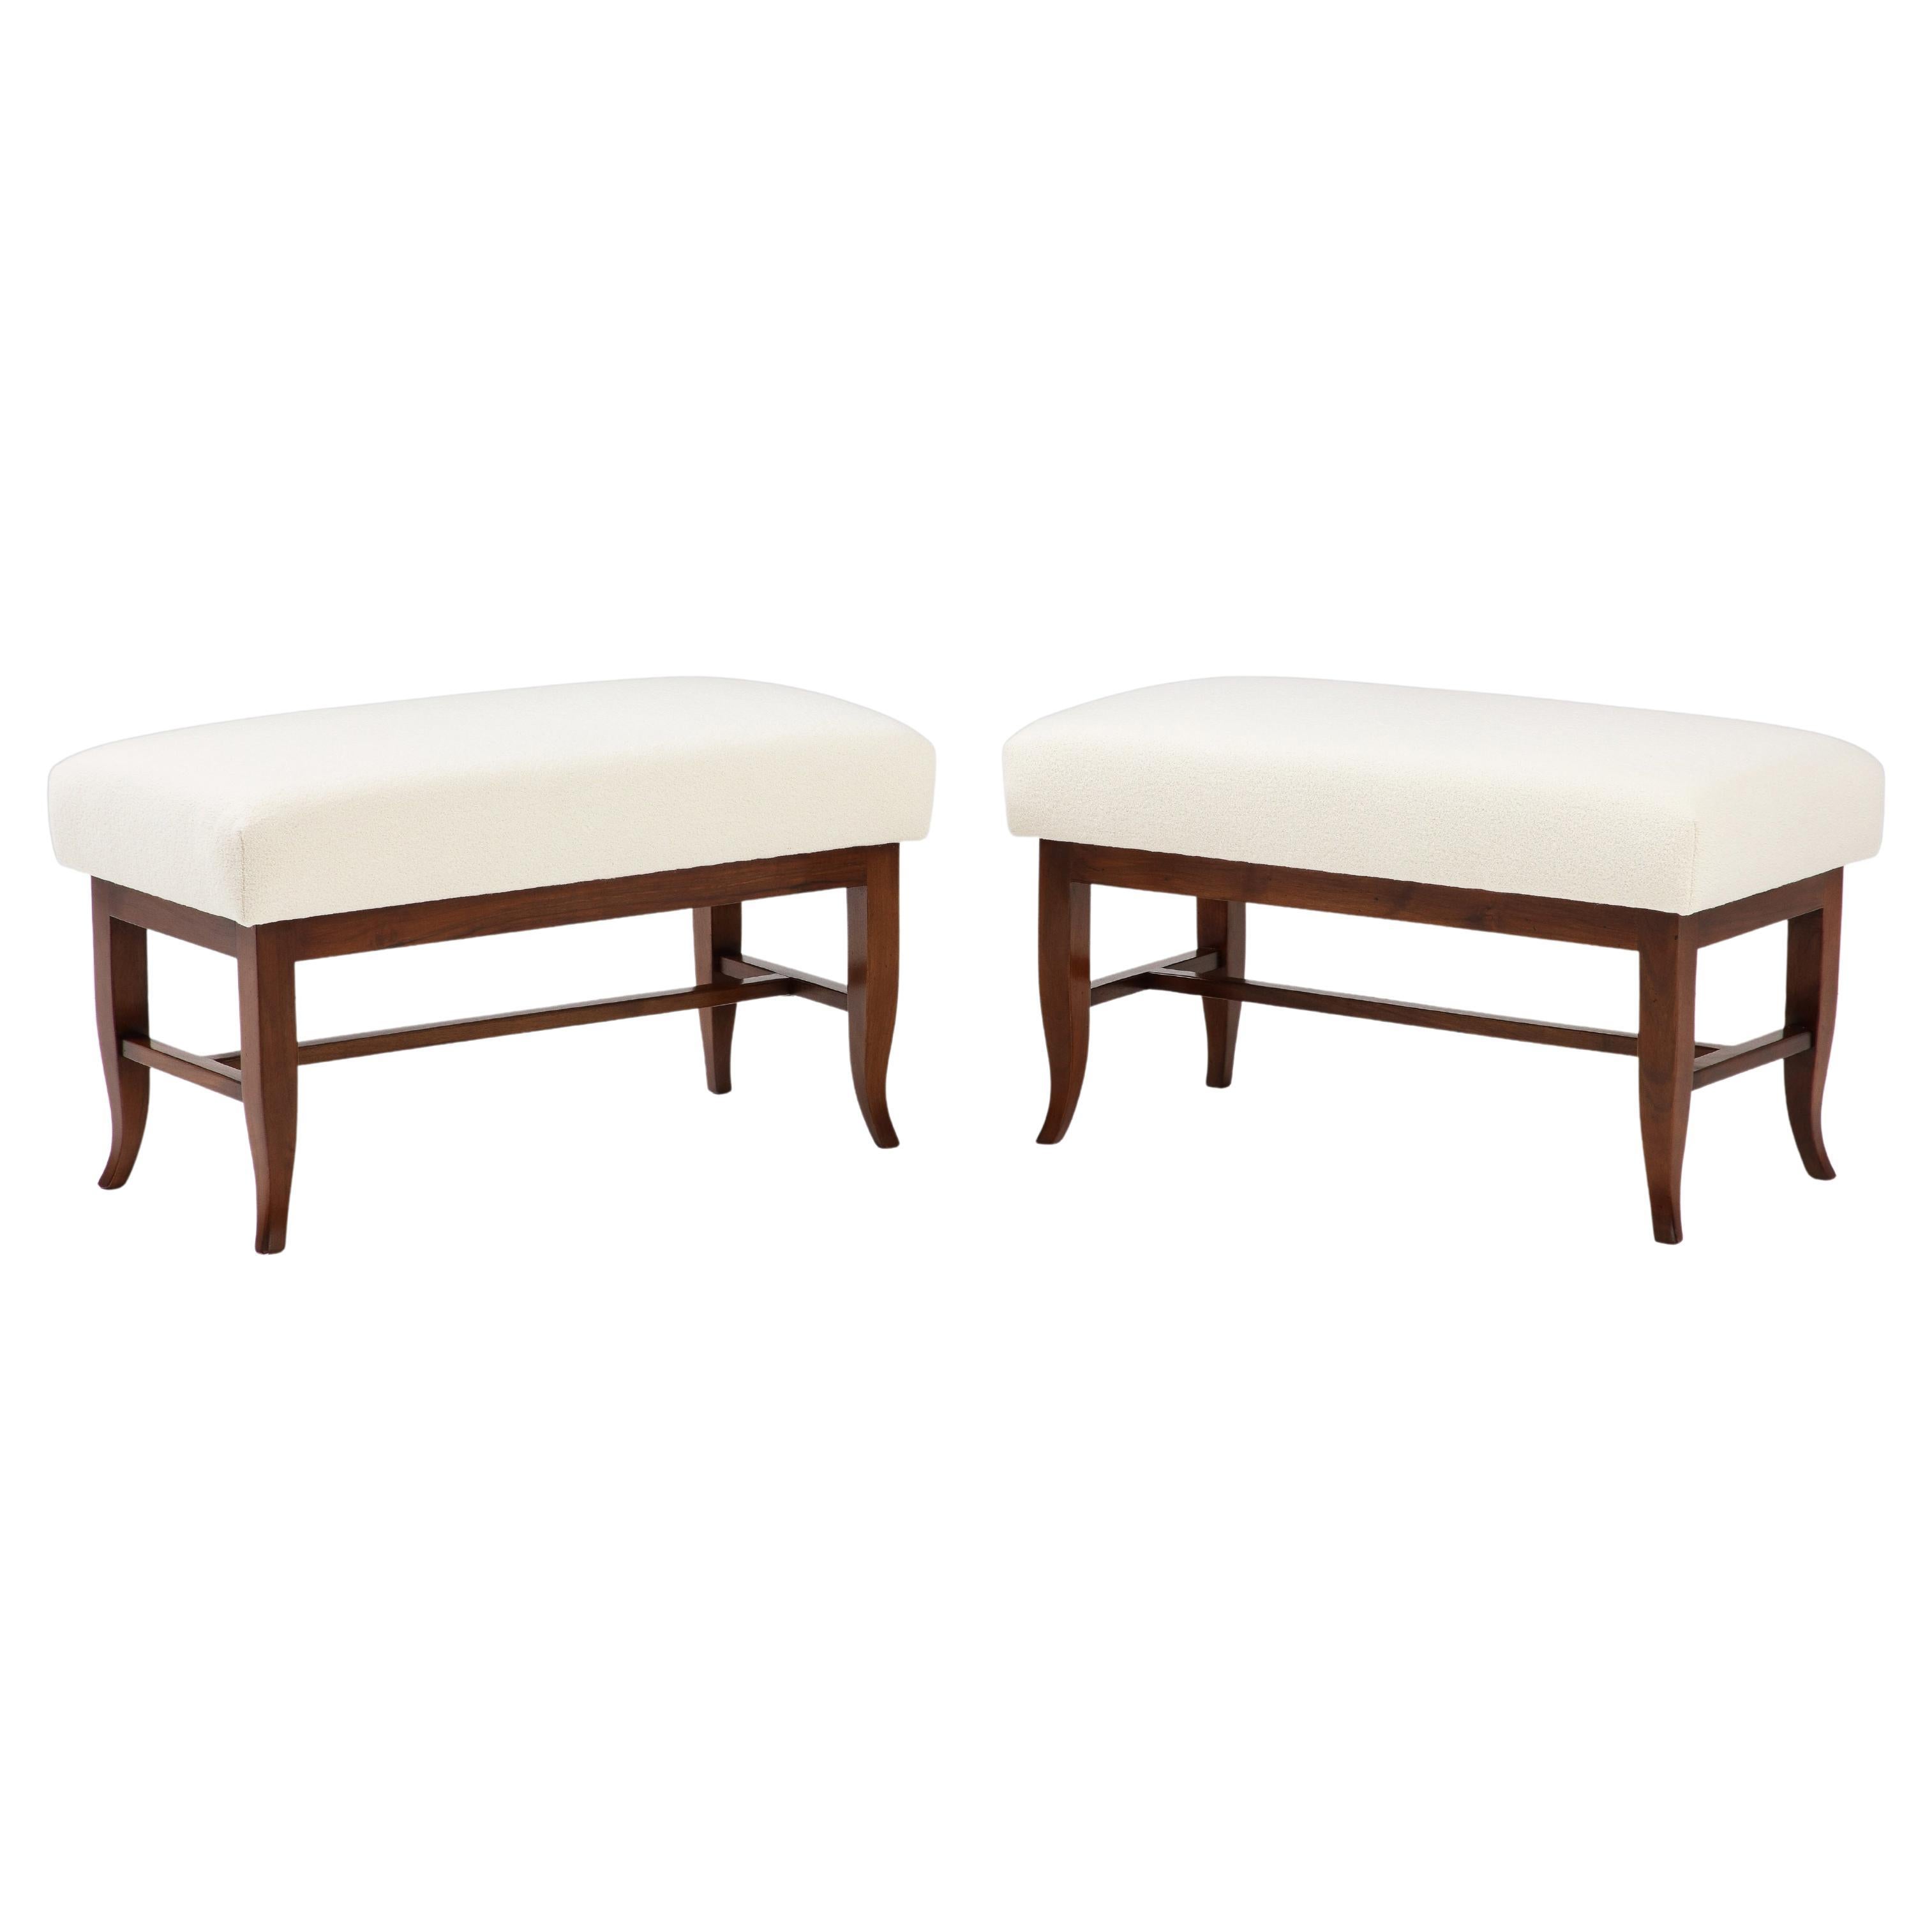 Gio Ponti Rare Pair of Benches in Walnut and Ivory Bouclé, Italy, 1930s